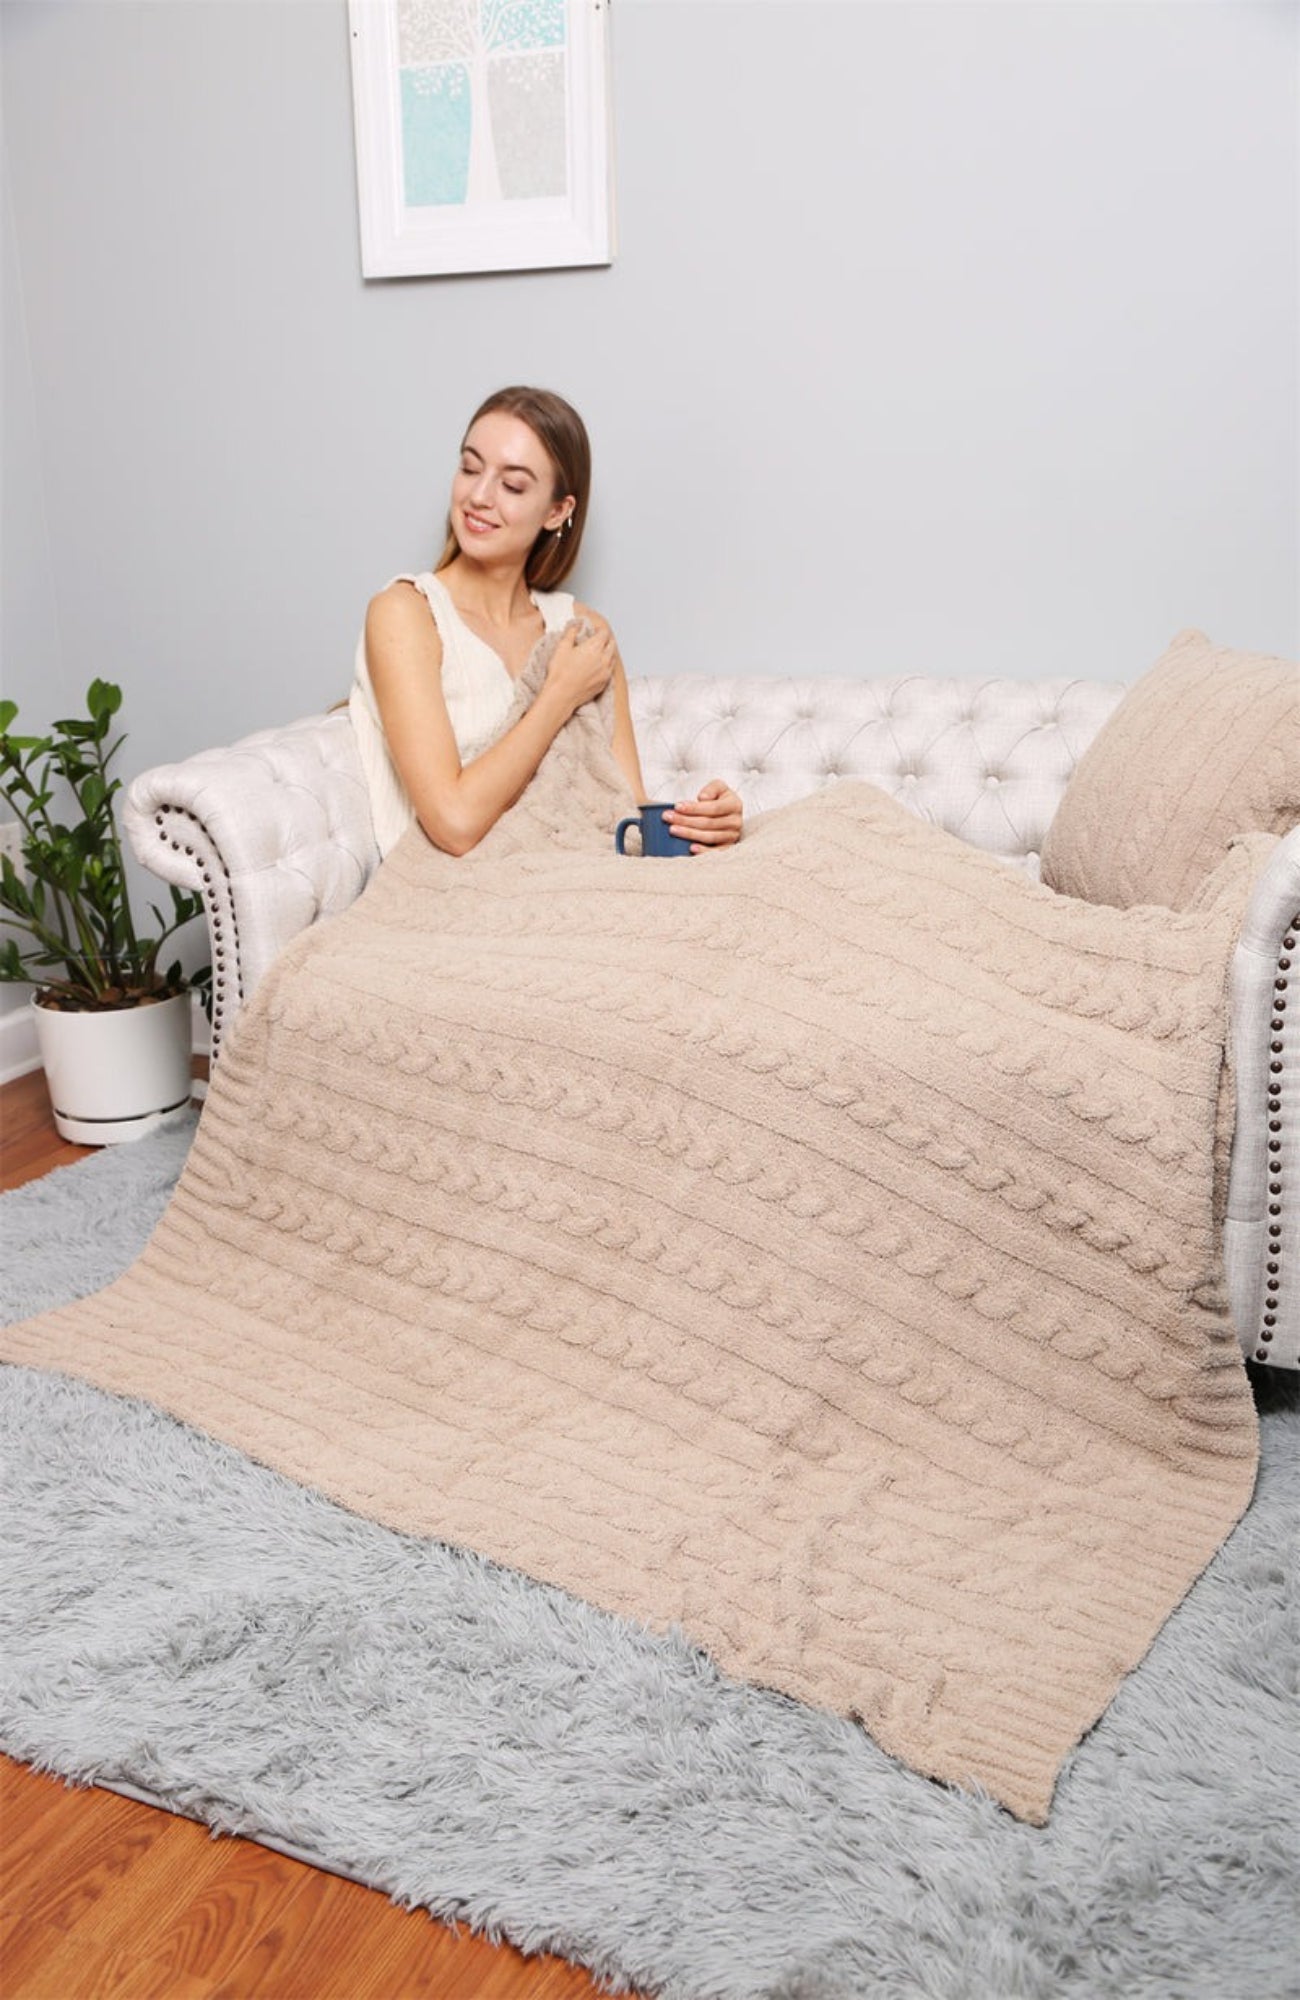 JCL2025 Super Lux Braided Cable Knit Throw Blanket